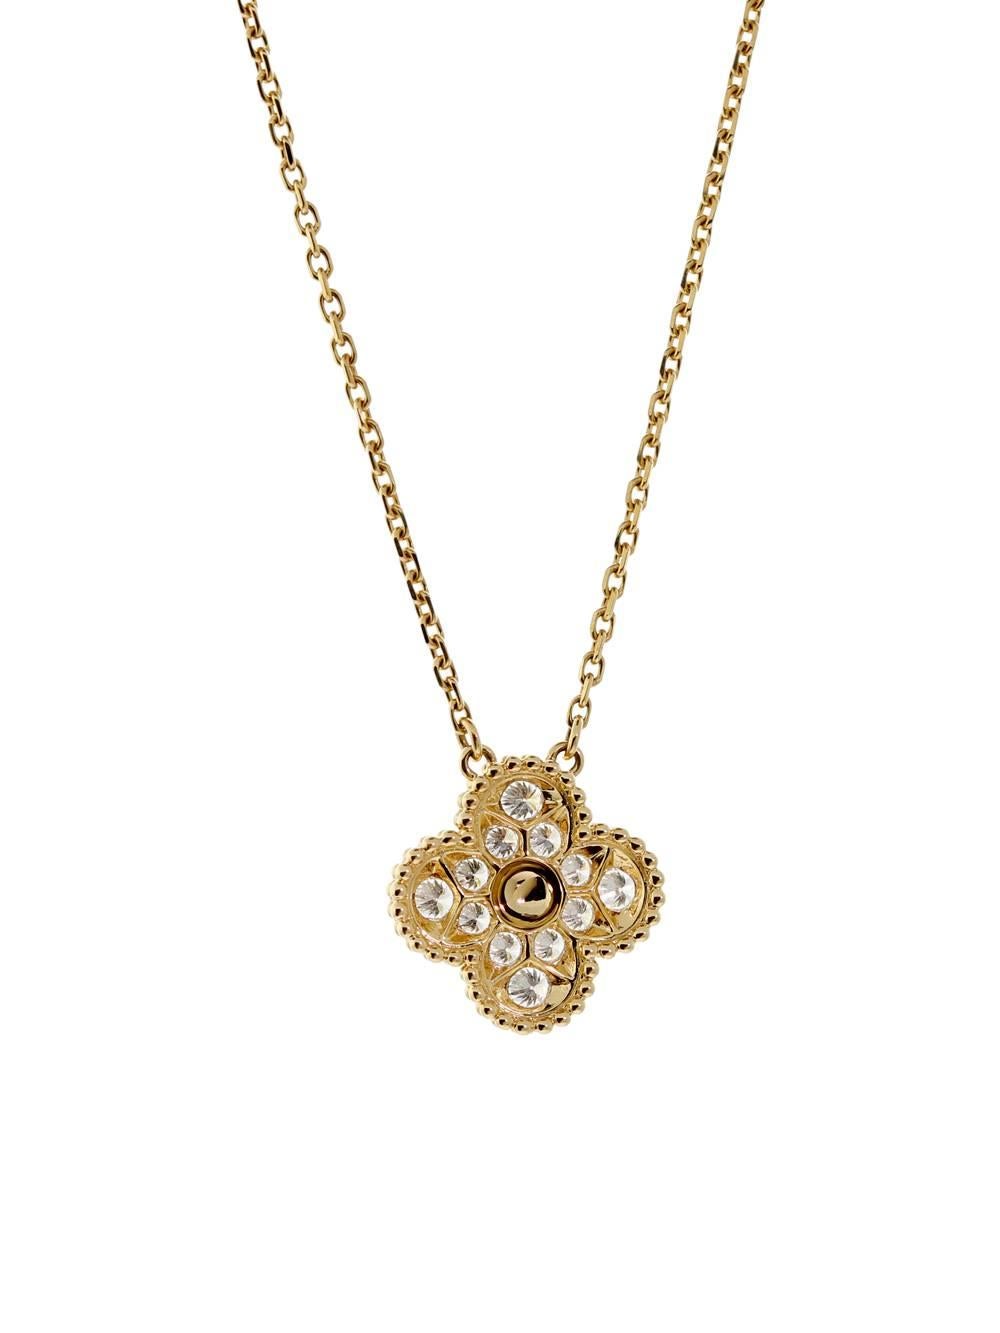 The perfect everyday necklace by Van Cleef & Arpels, this 